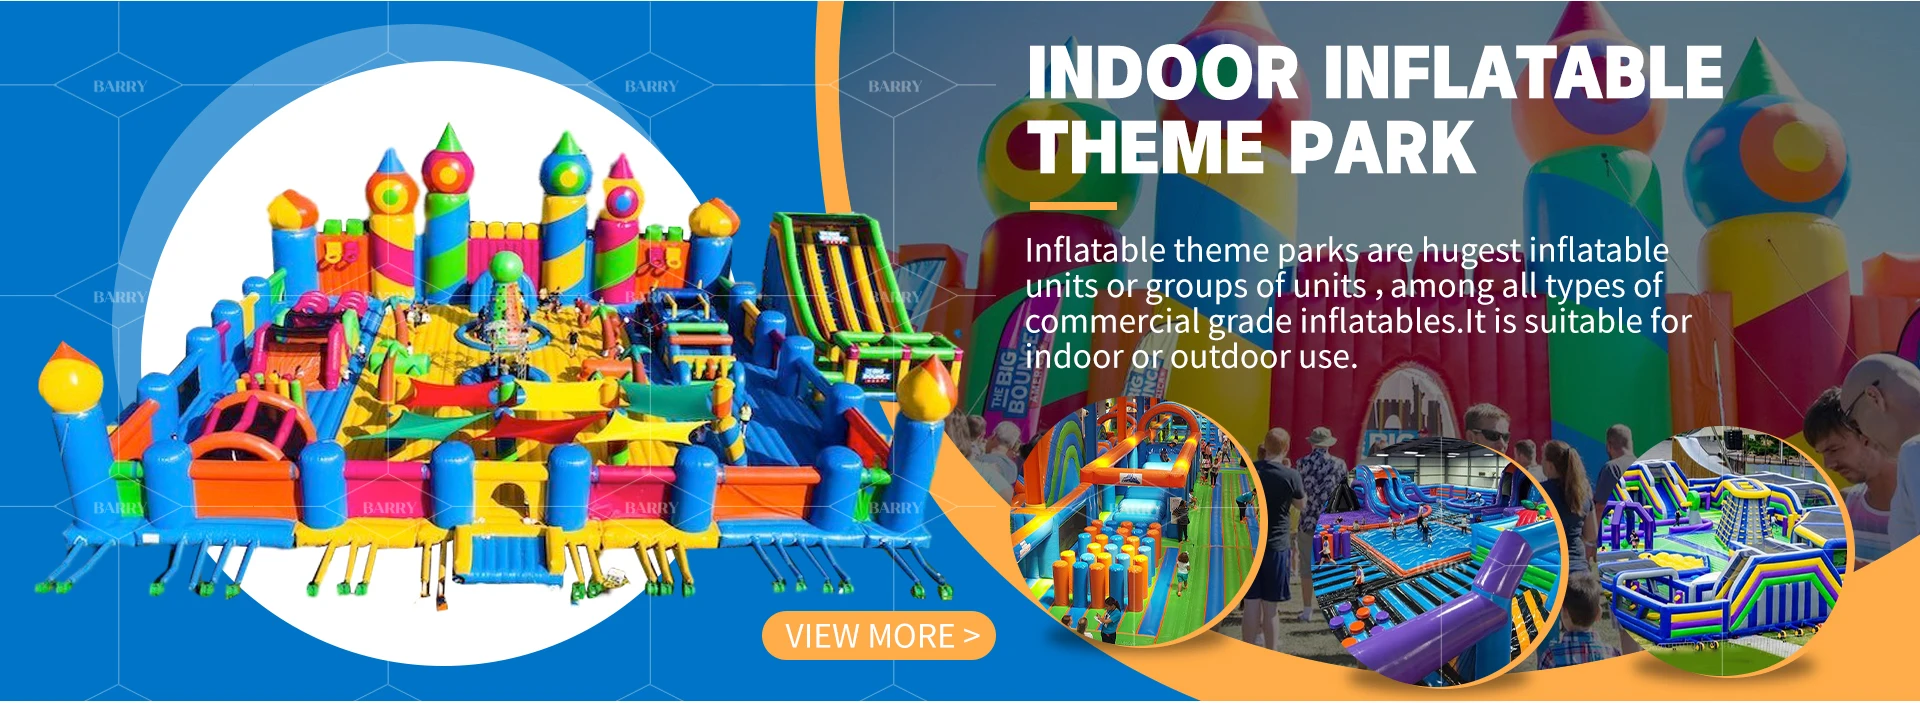 inflatable theme park giant inflatable indoor theme park inflatable theme park for sale gigante inflatable indoor theme park 